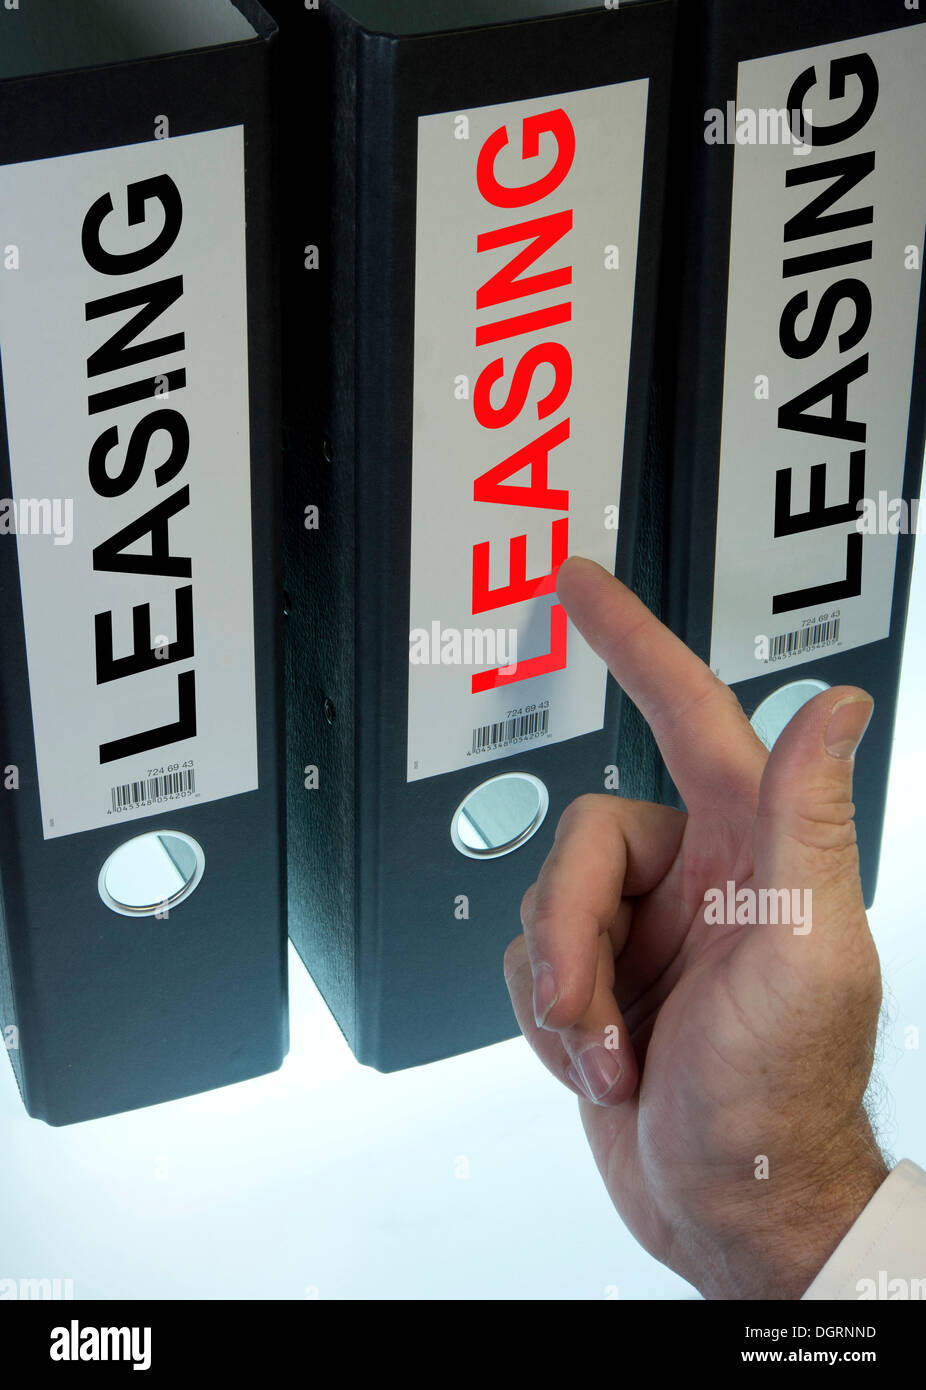 Hand pointing to a ring binder labelled 'LEASING' Stock Photo